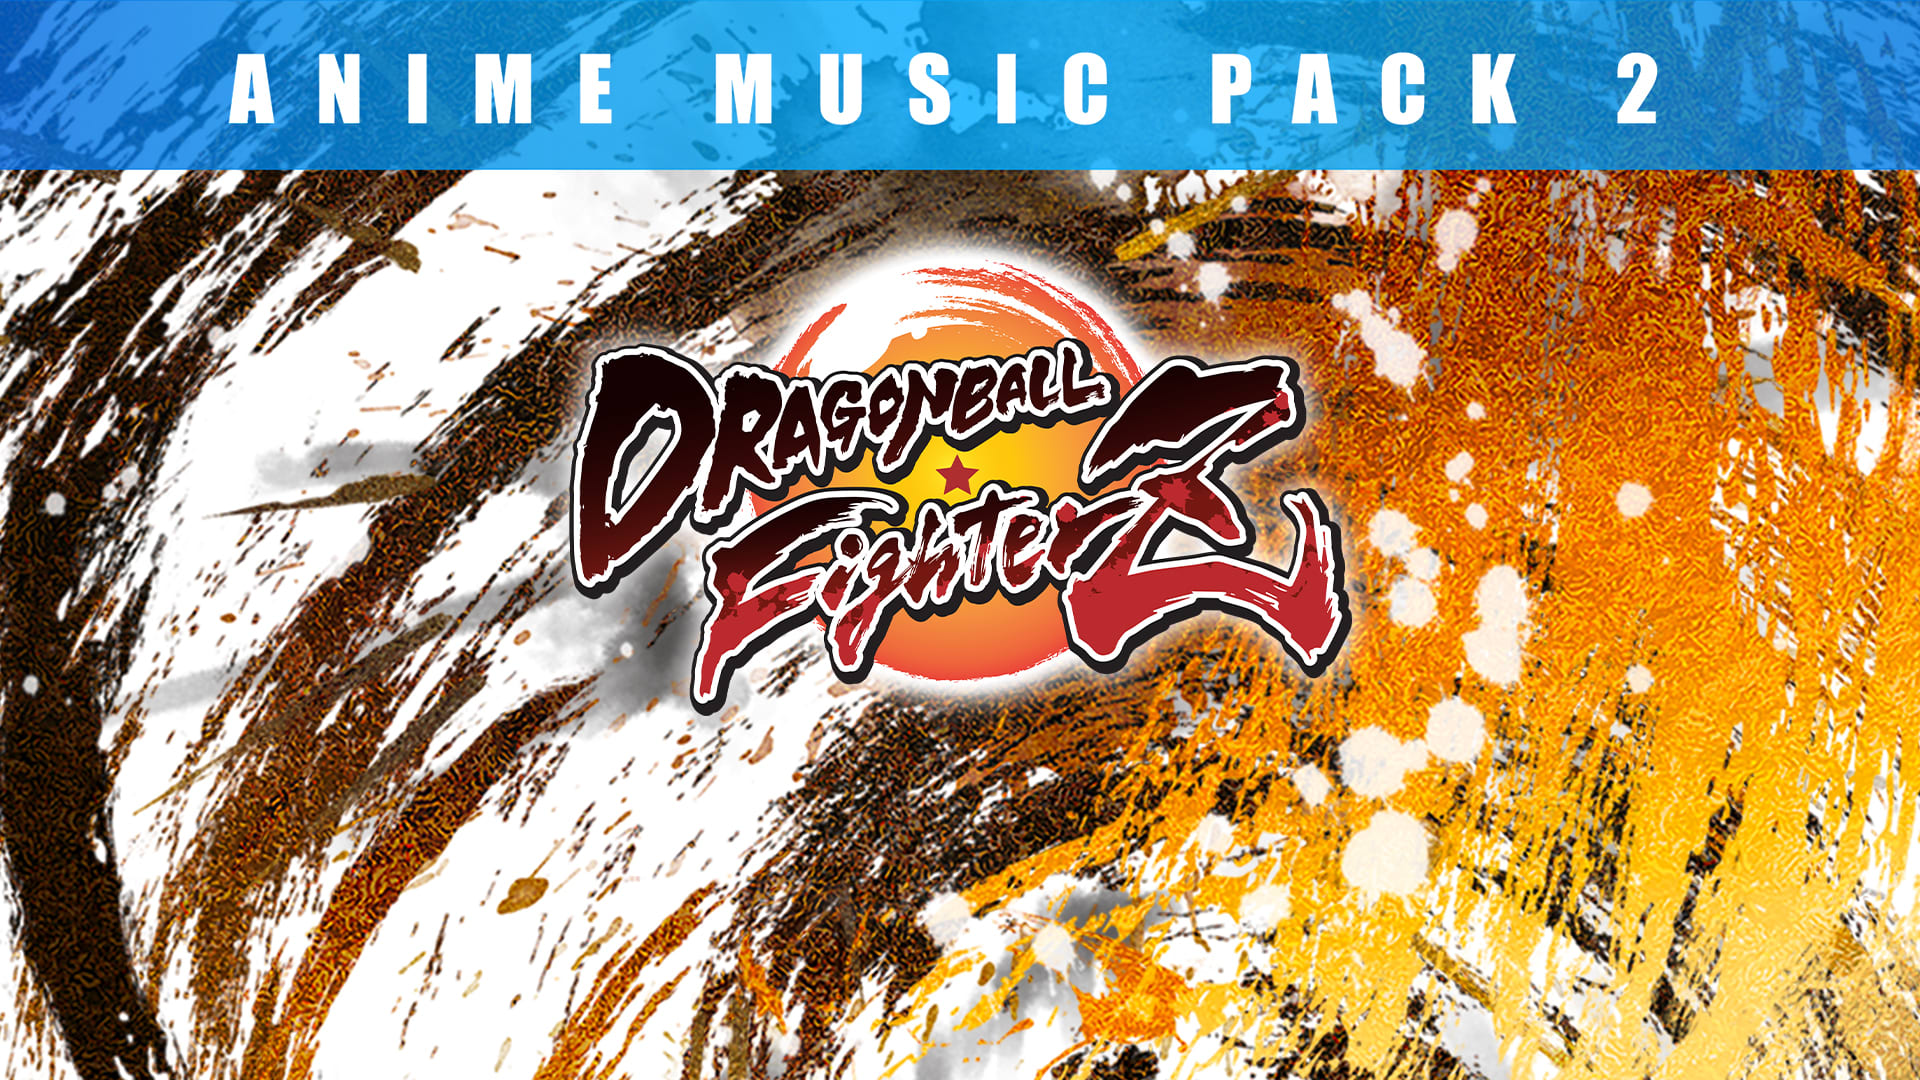 DRAGON BALL FighterZ – Anime Music Pack 2